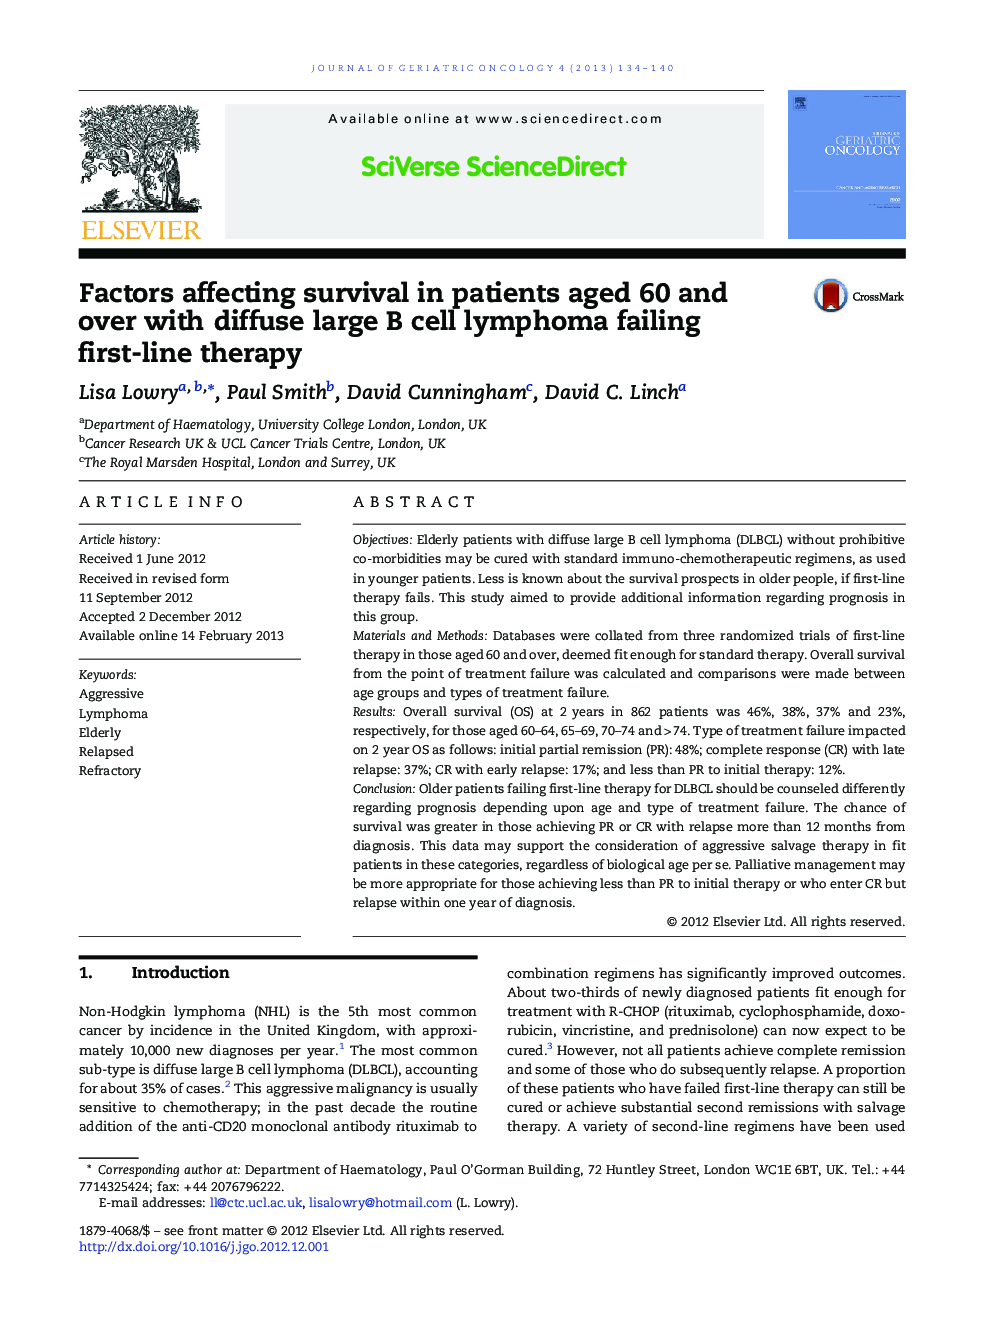 Factors affecting survival in patients aged 60 and over with diffuse large B cell lymphoma failing first-line therapy